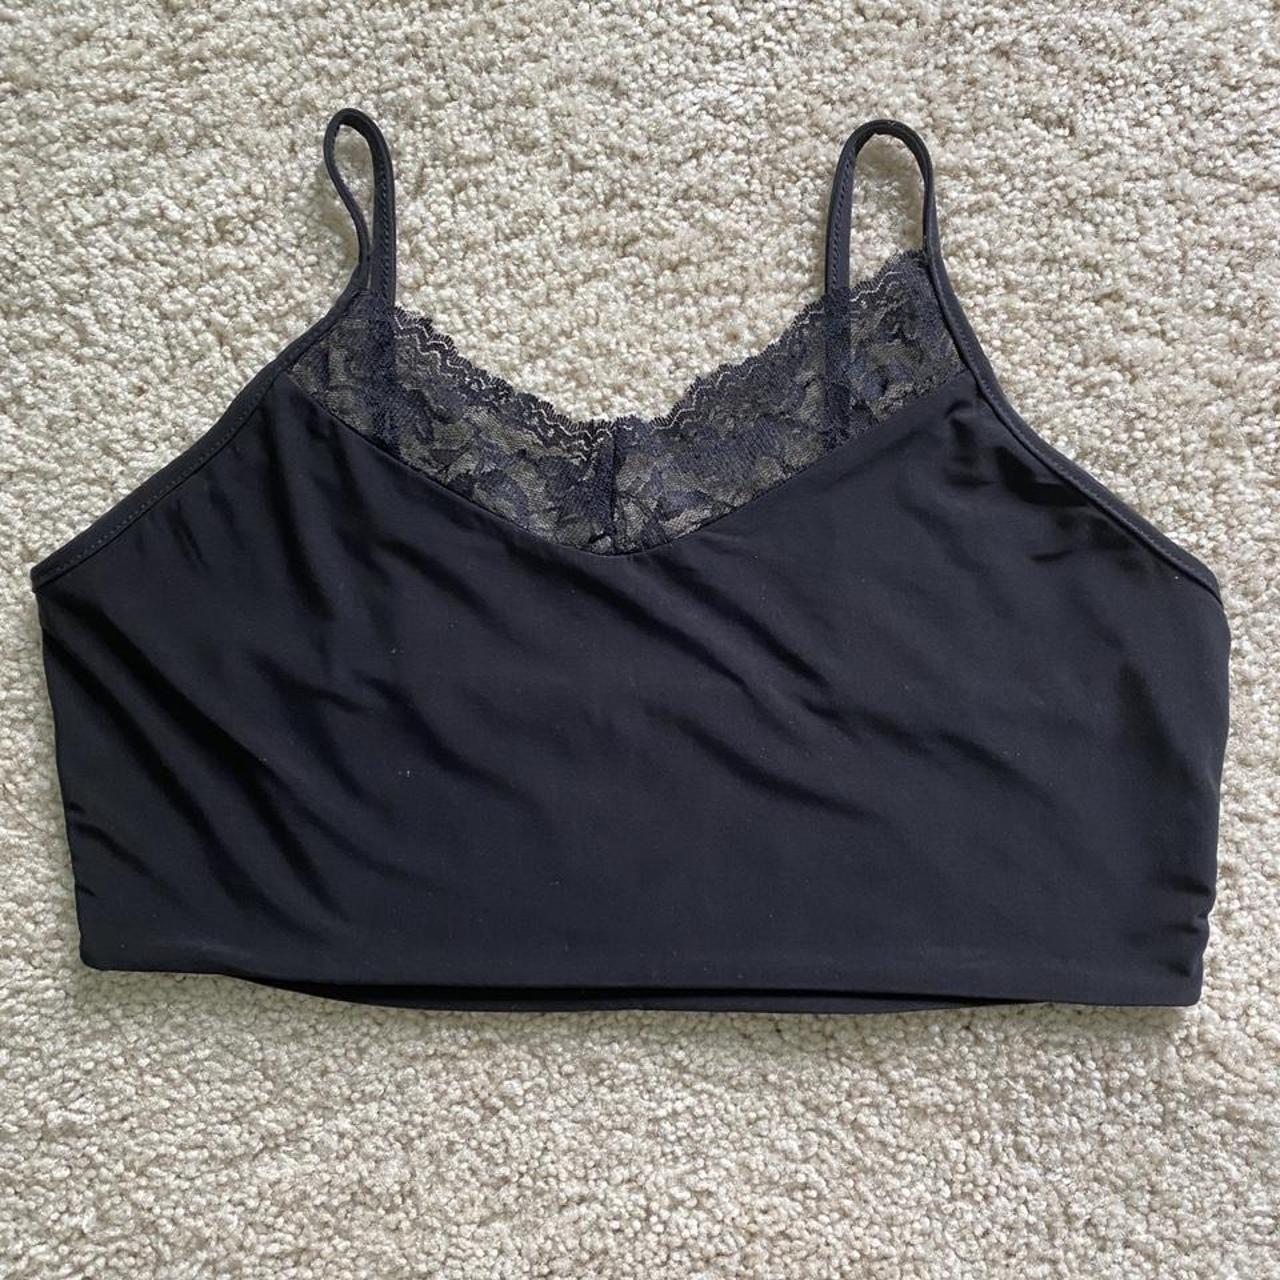 Product Image 3 - cute black top, great for